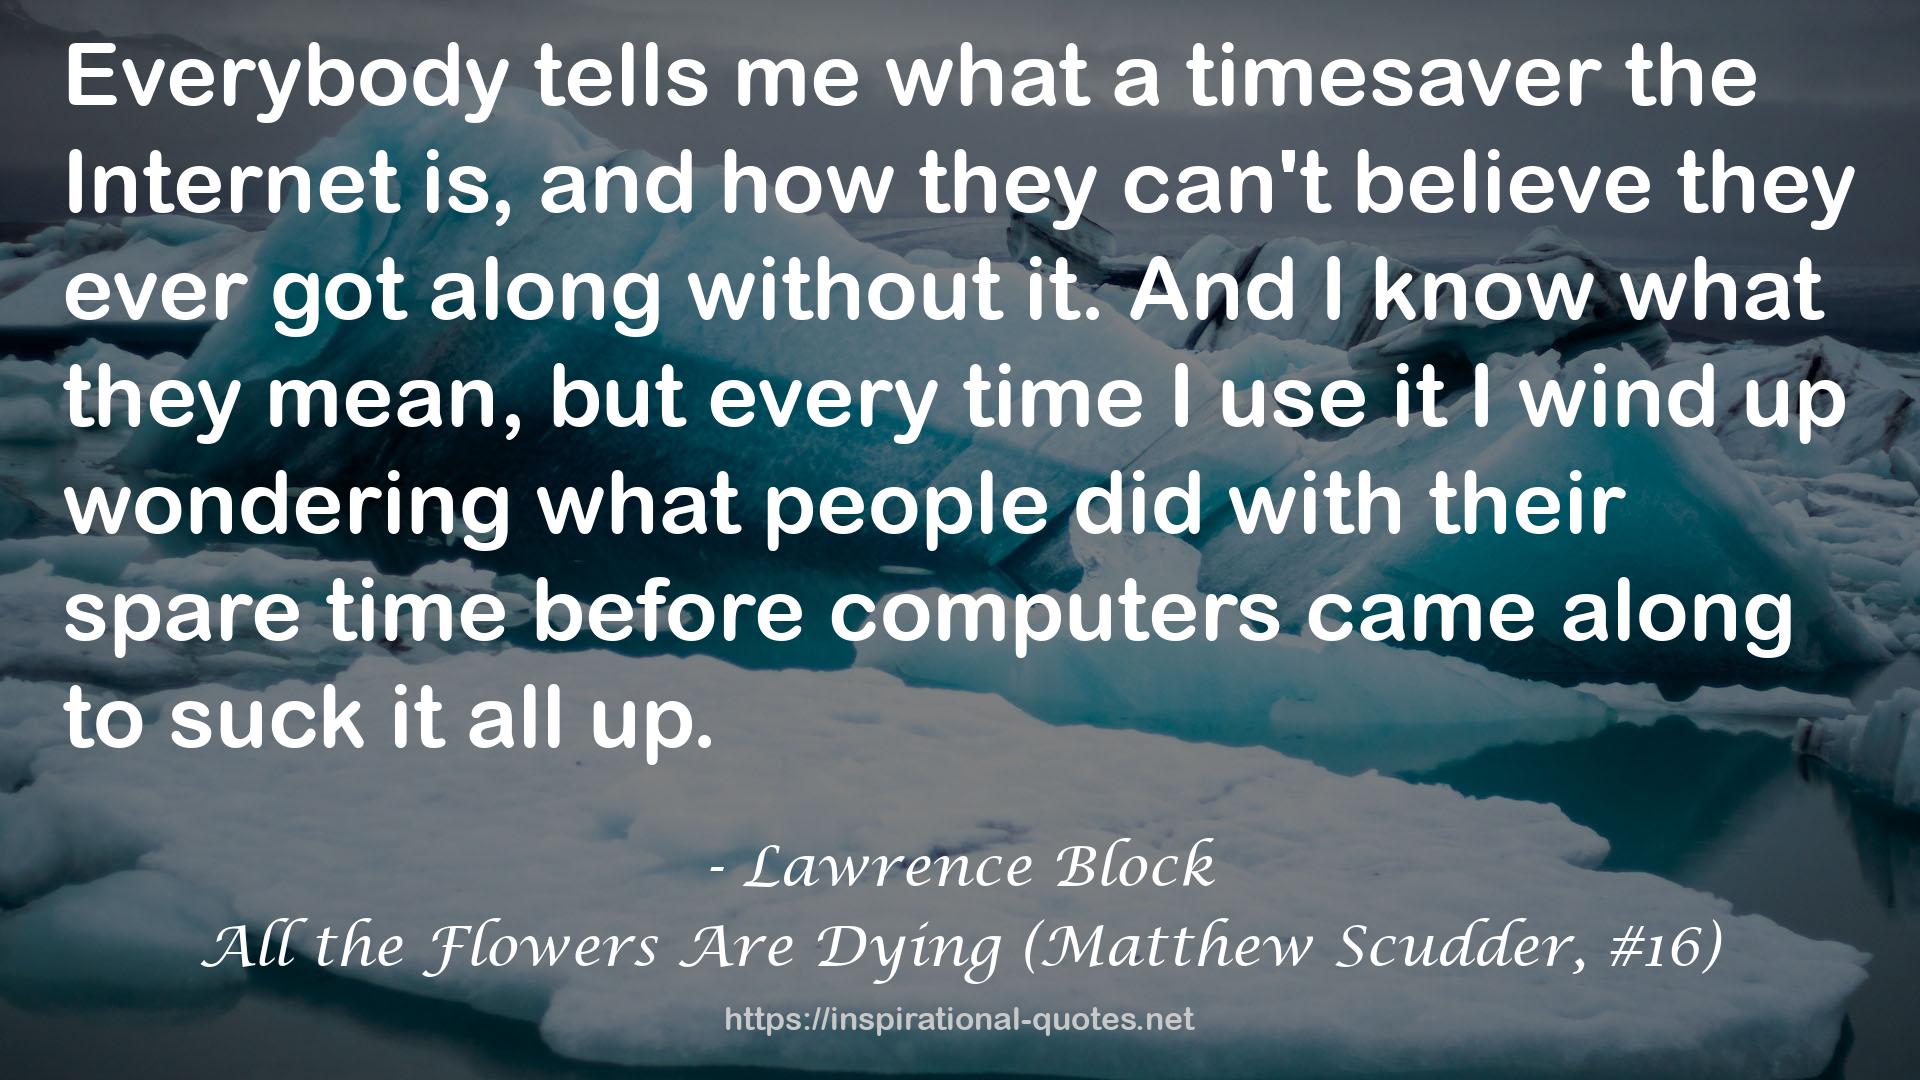 All the Flowers Are Dying (Matthew Scudder, #16) QUOTES